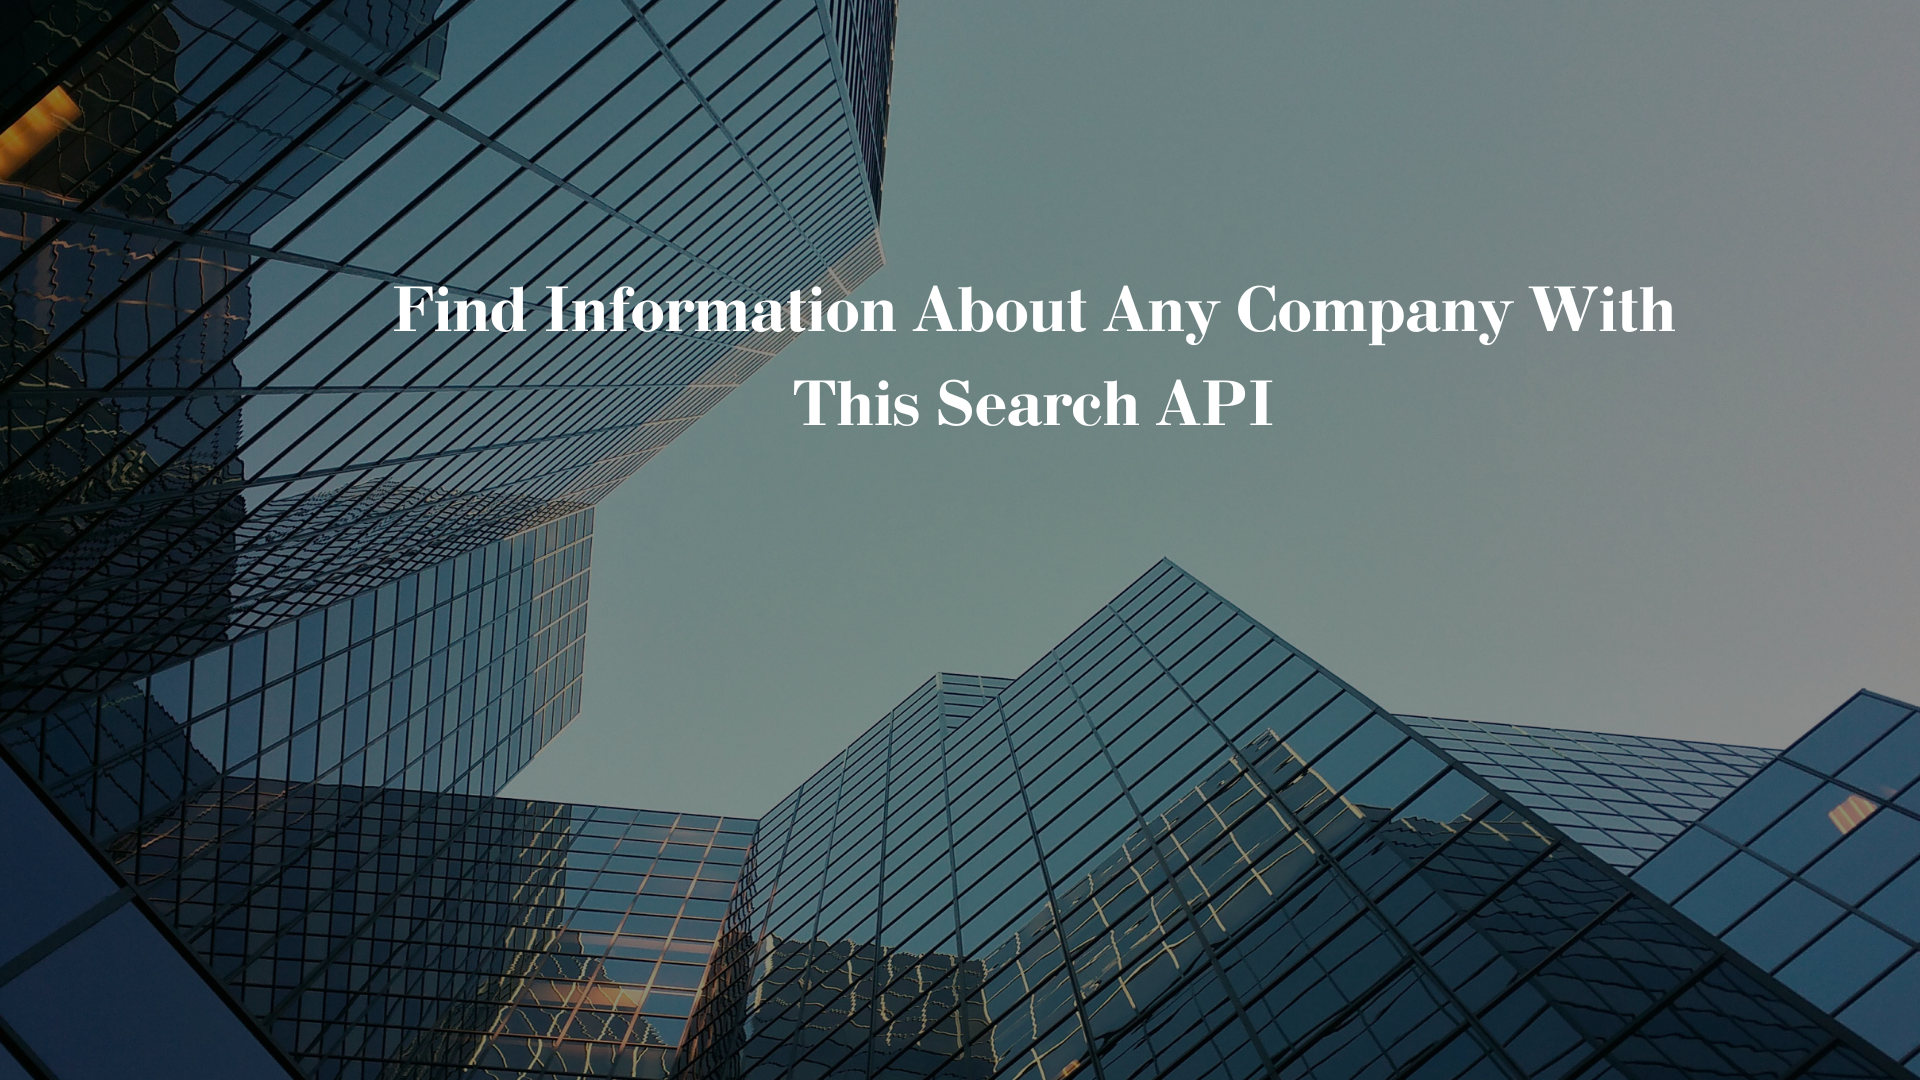 Find Information About Any Company With This Search API